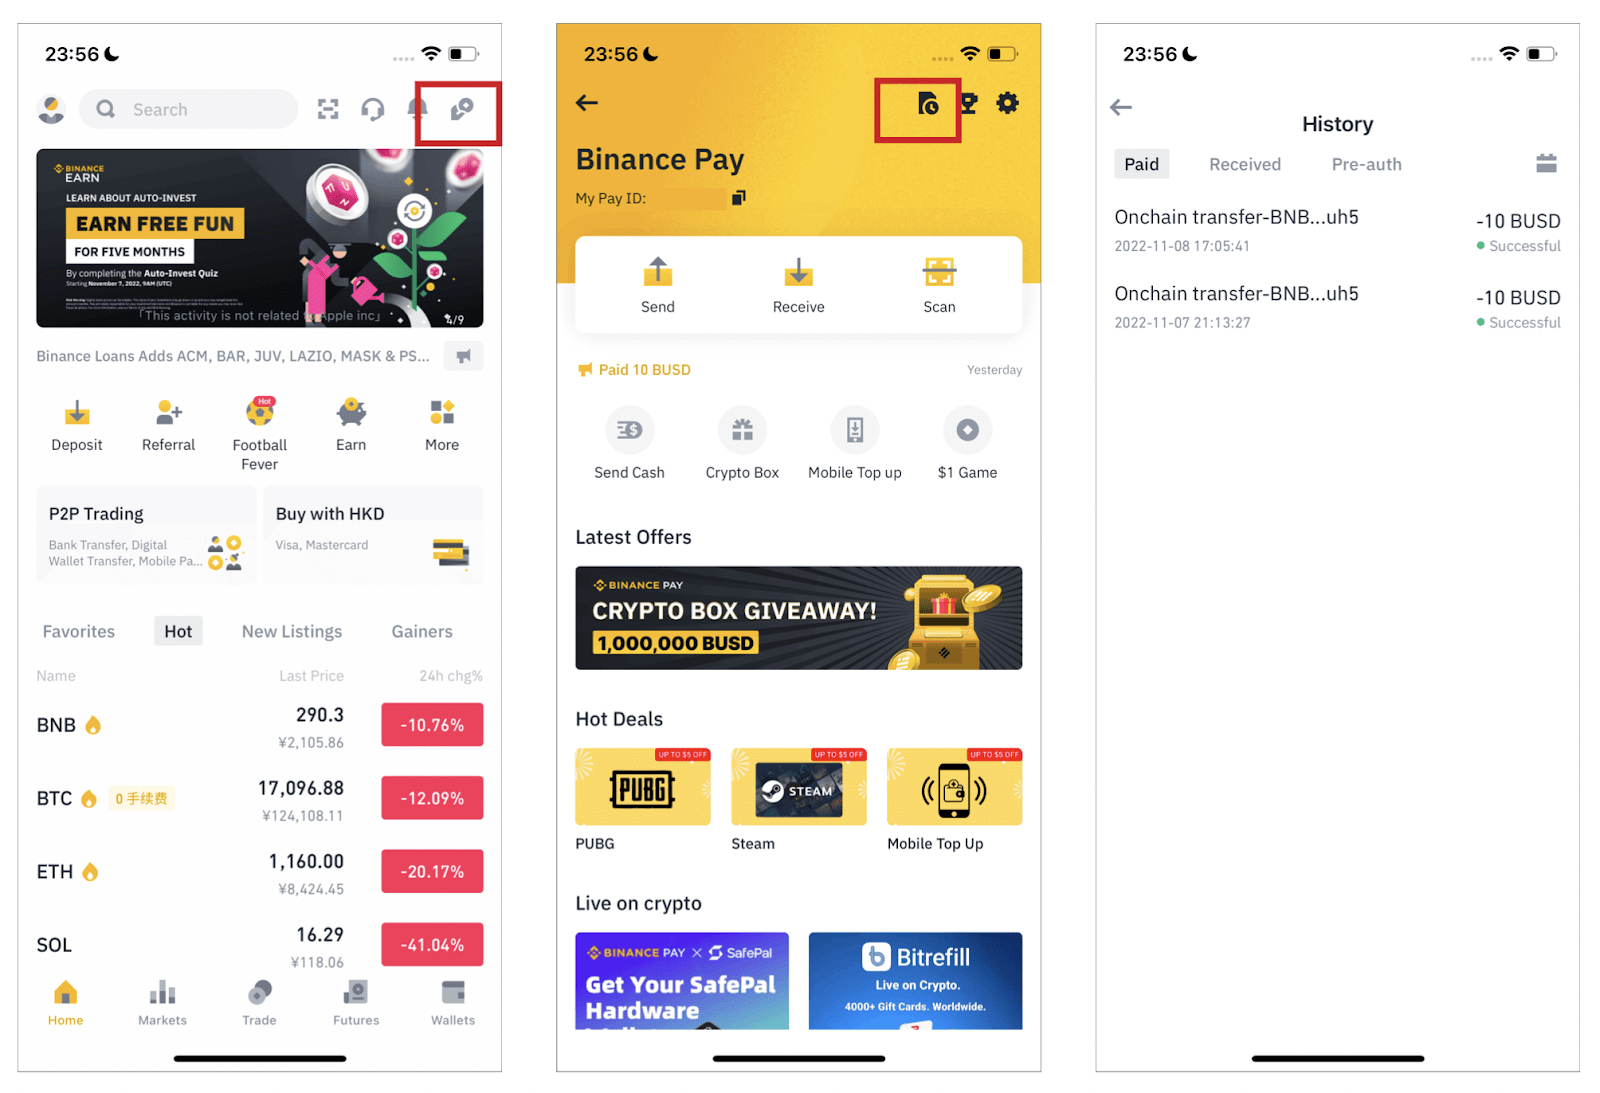 How to Transfer BNB from Trust Wallet to Binance